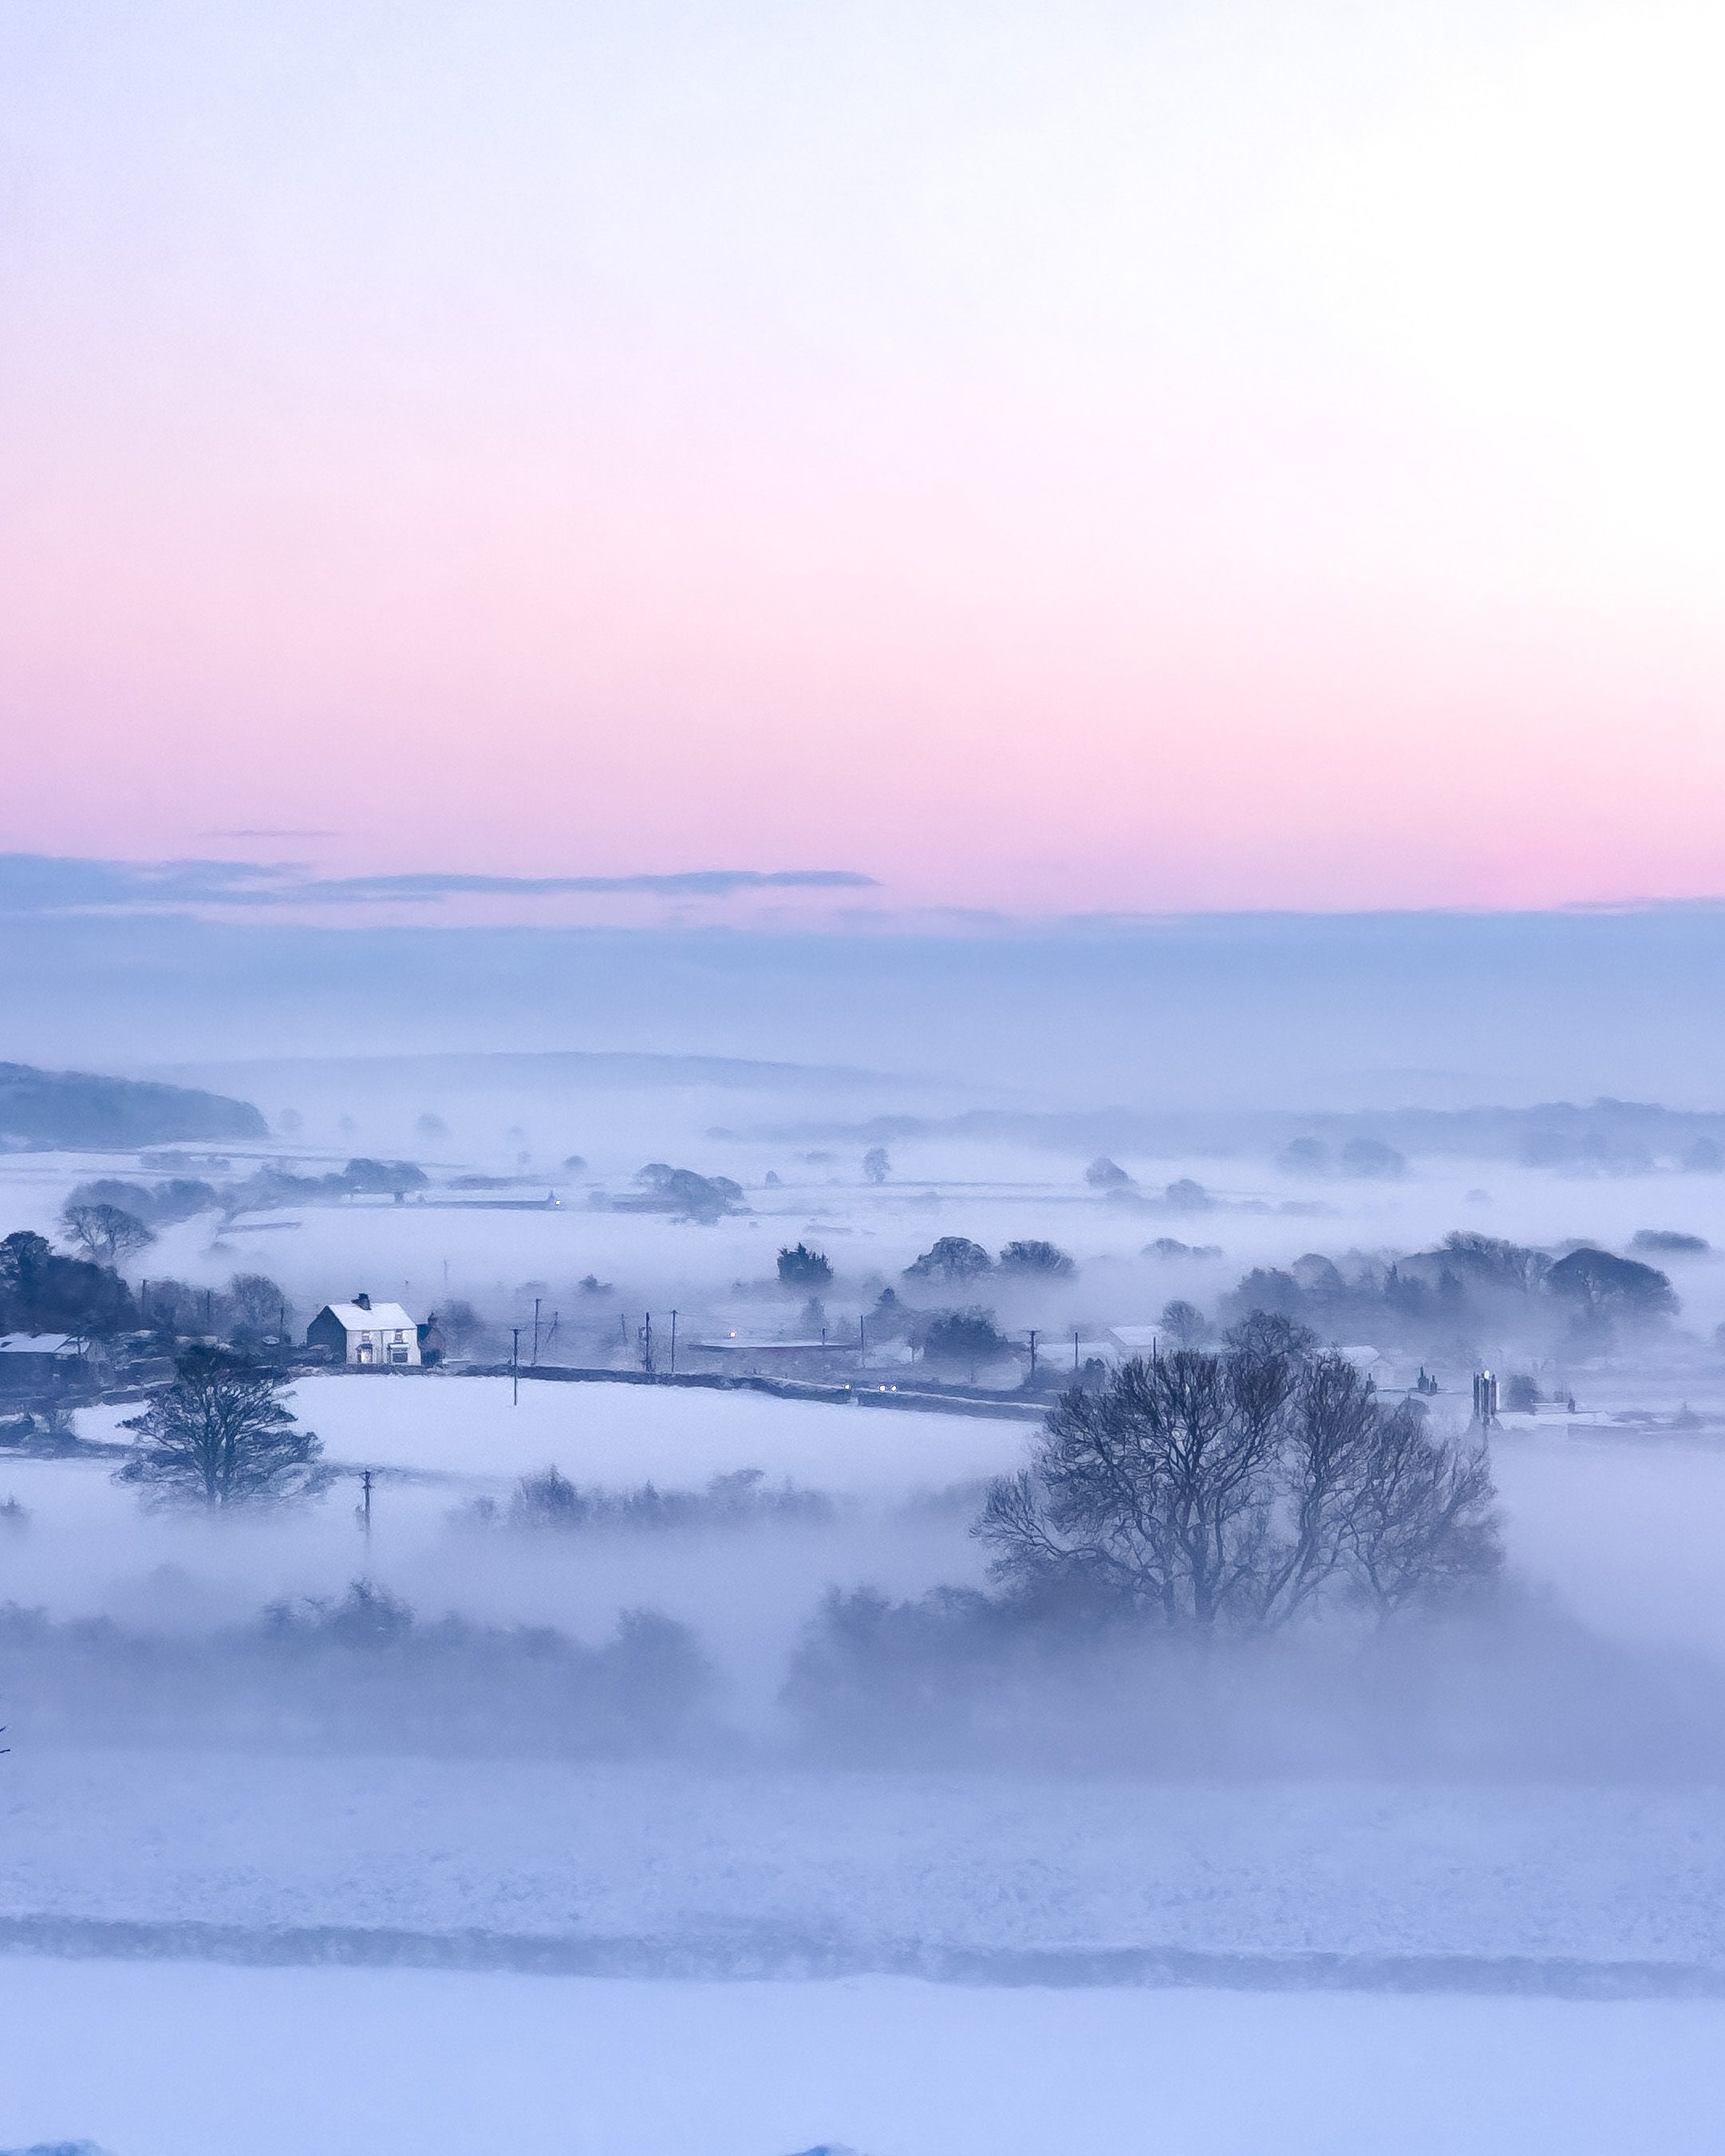 View over snowy Welsh village with mist and pink sky